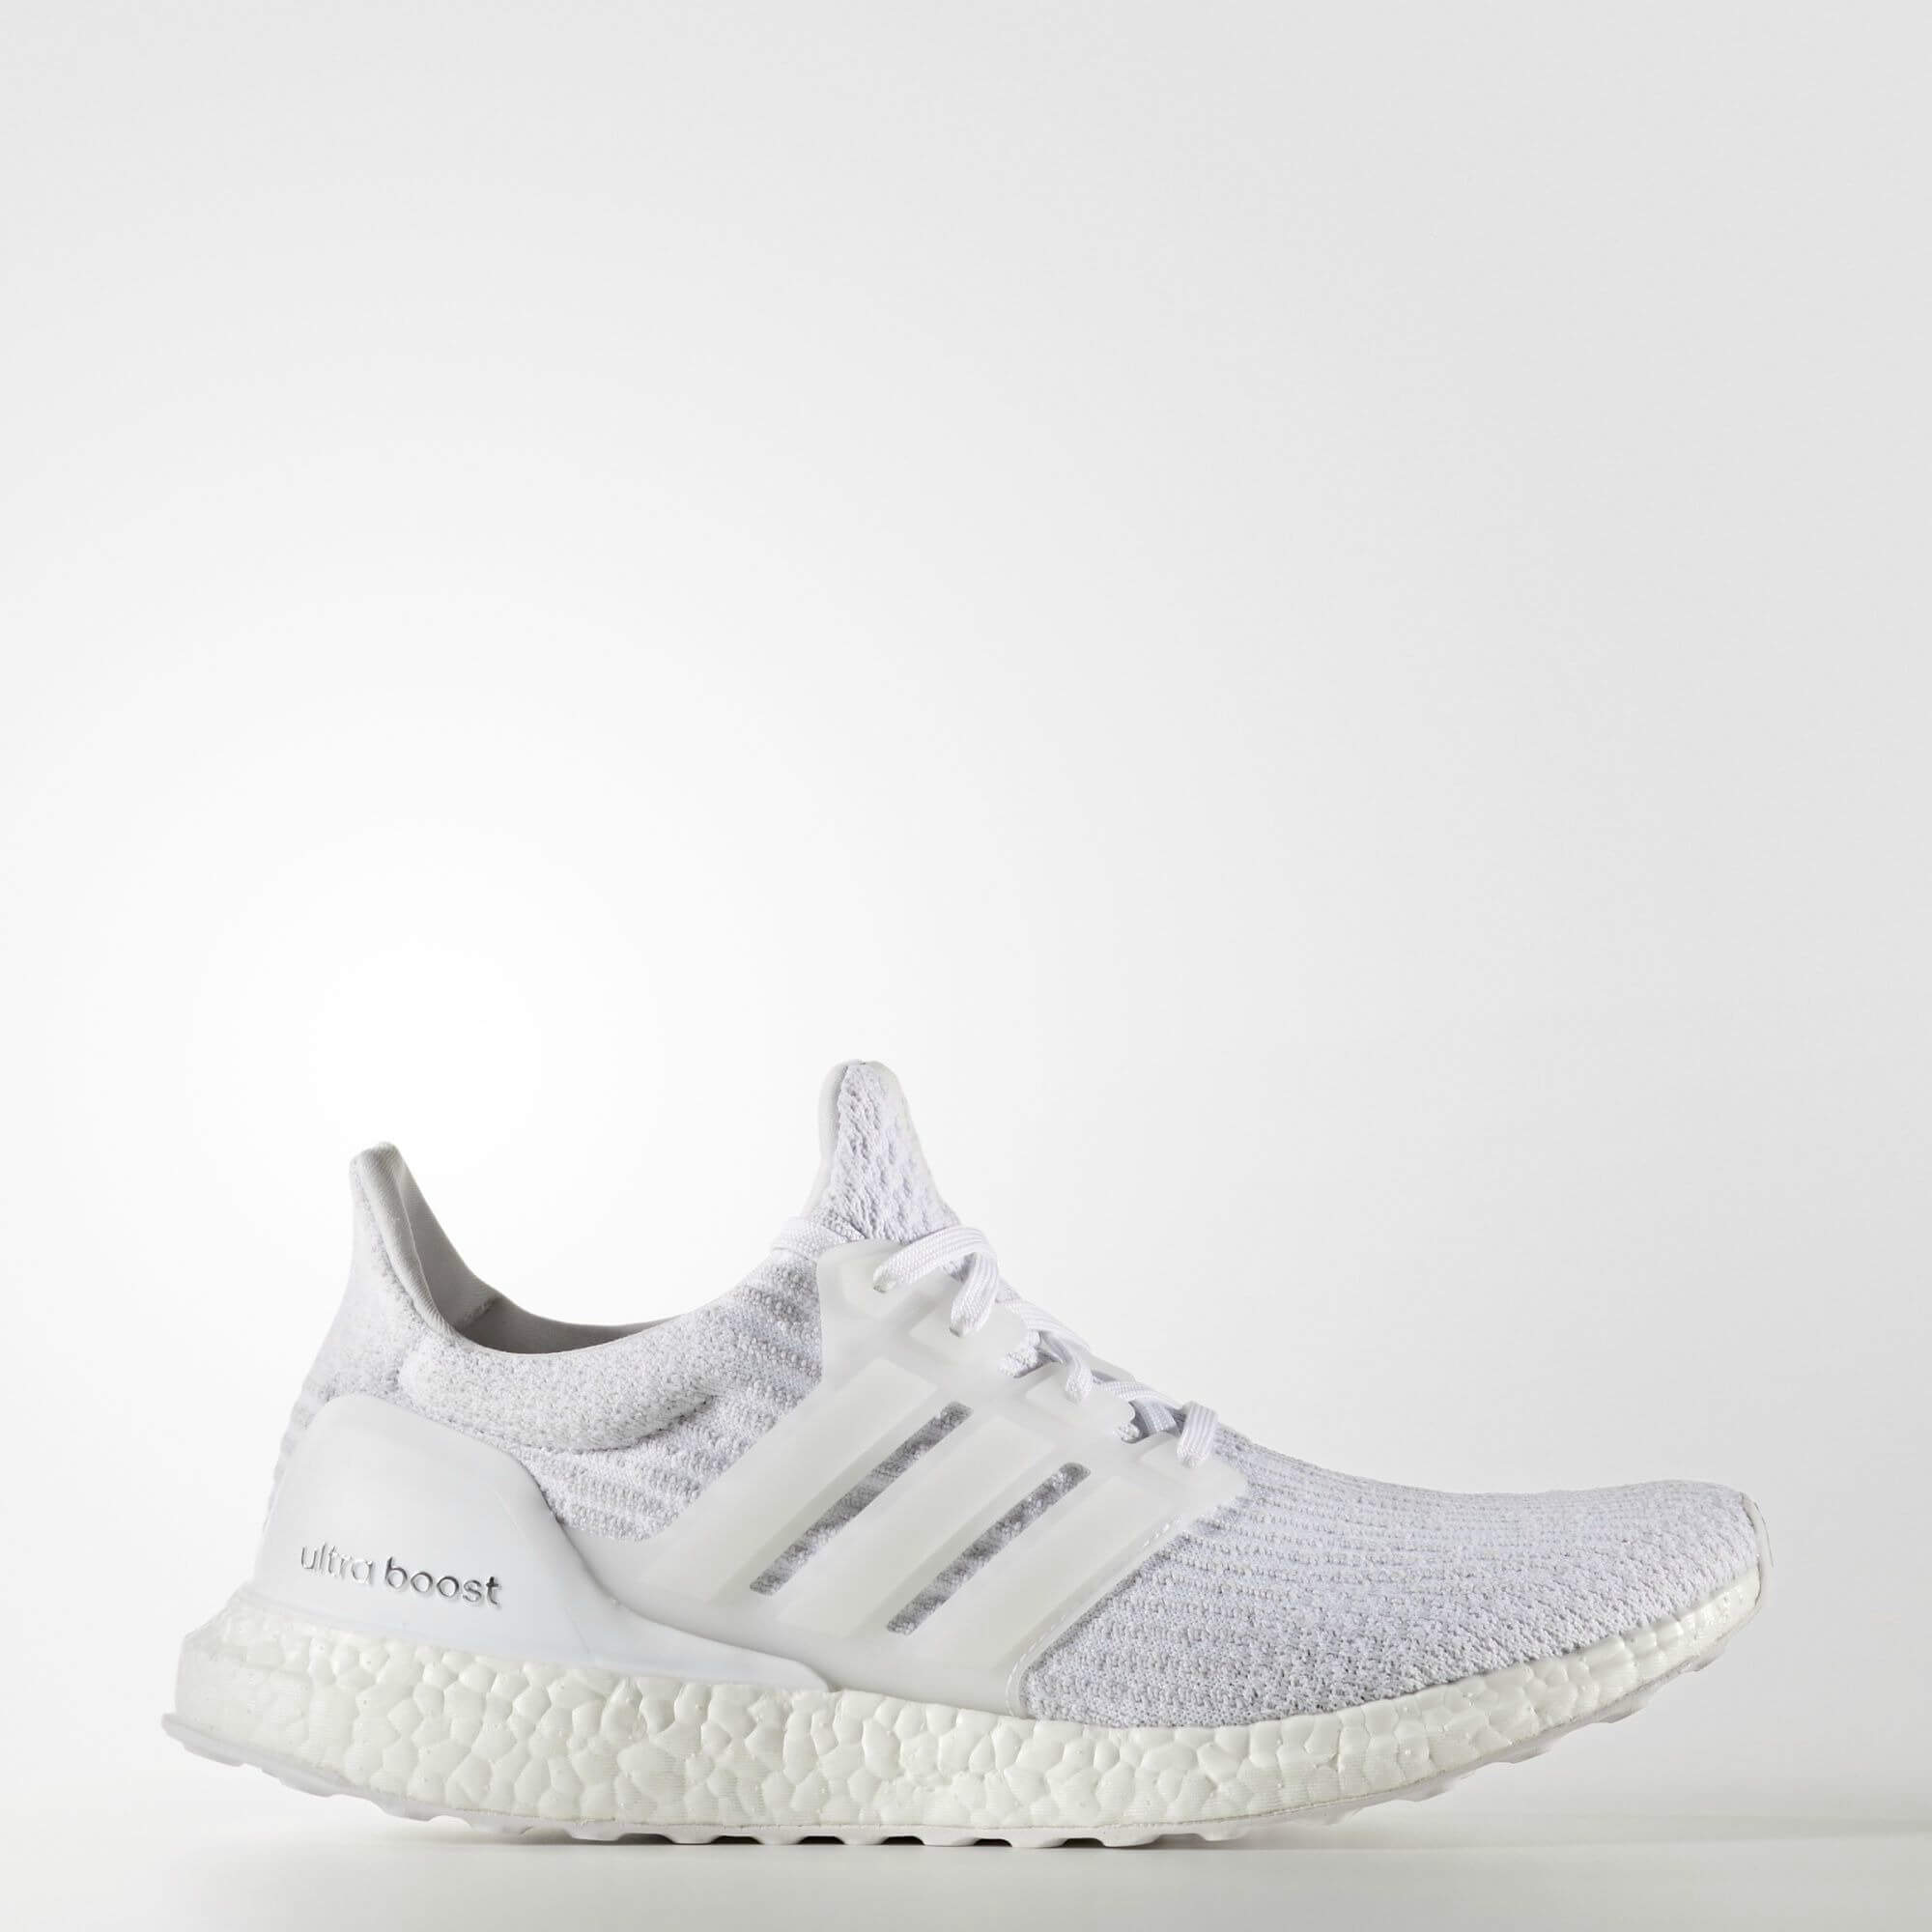 Adidas Boost Ultra White shoe laces